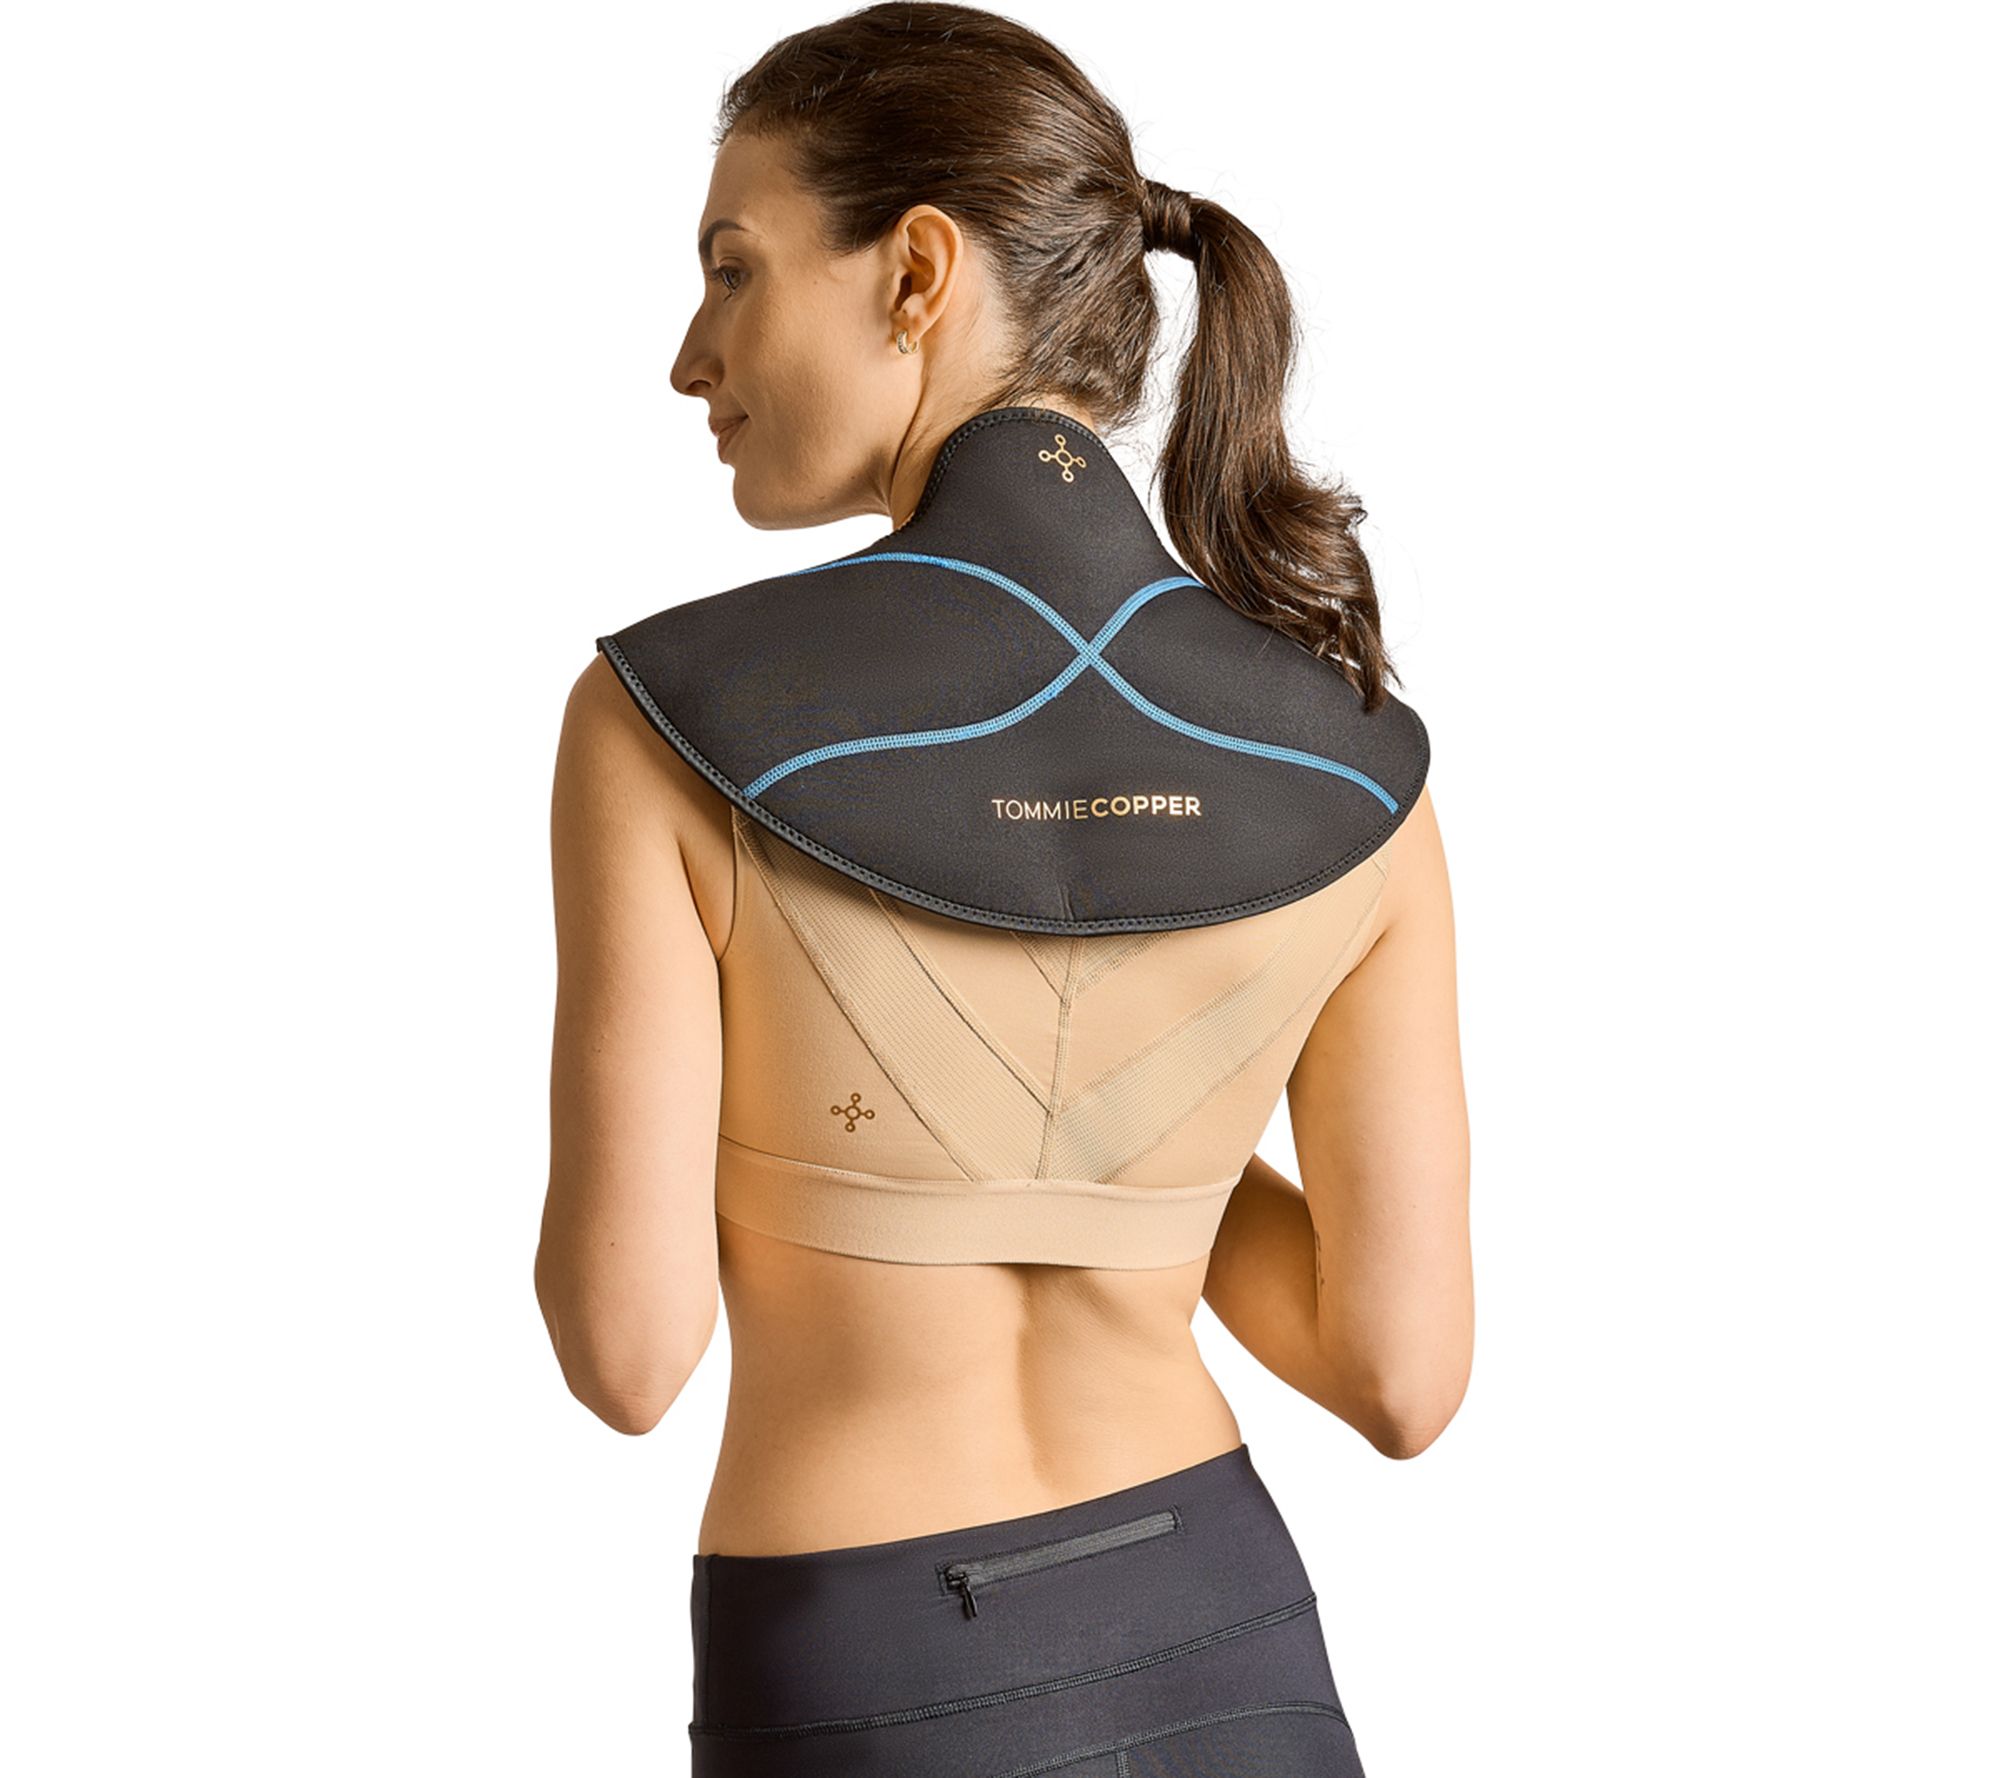  Tommie Copper Back Brace and Posture Corrector for Men